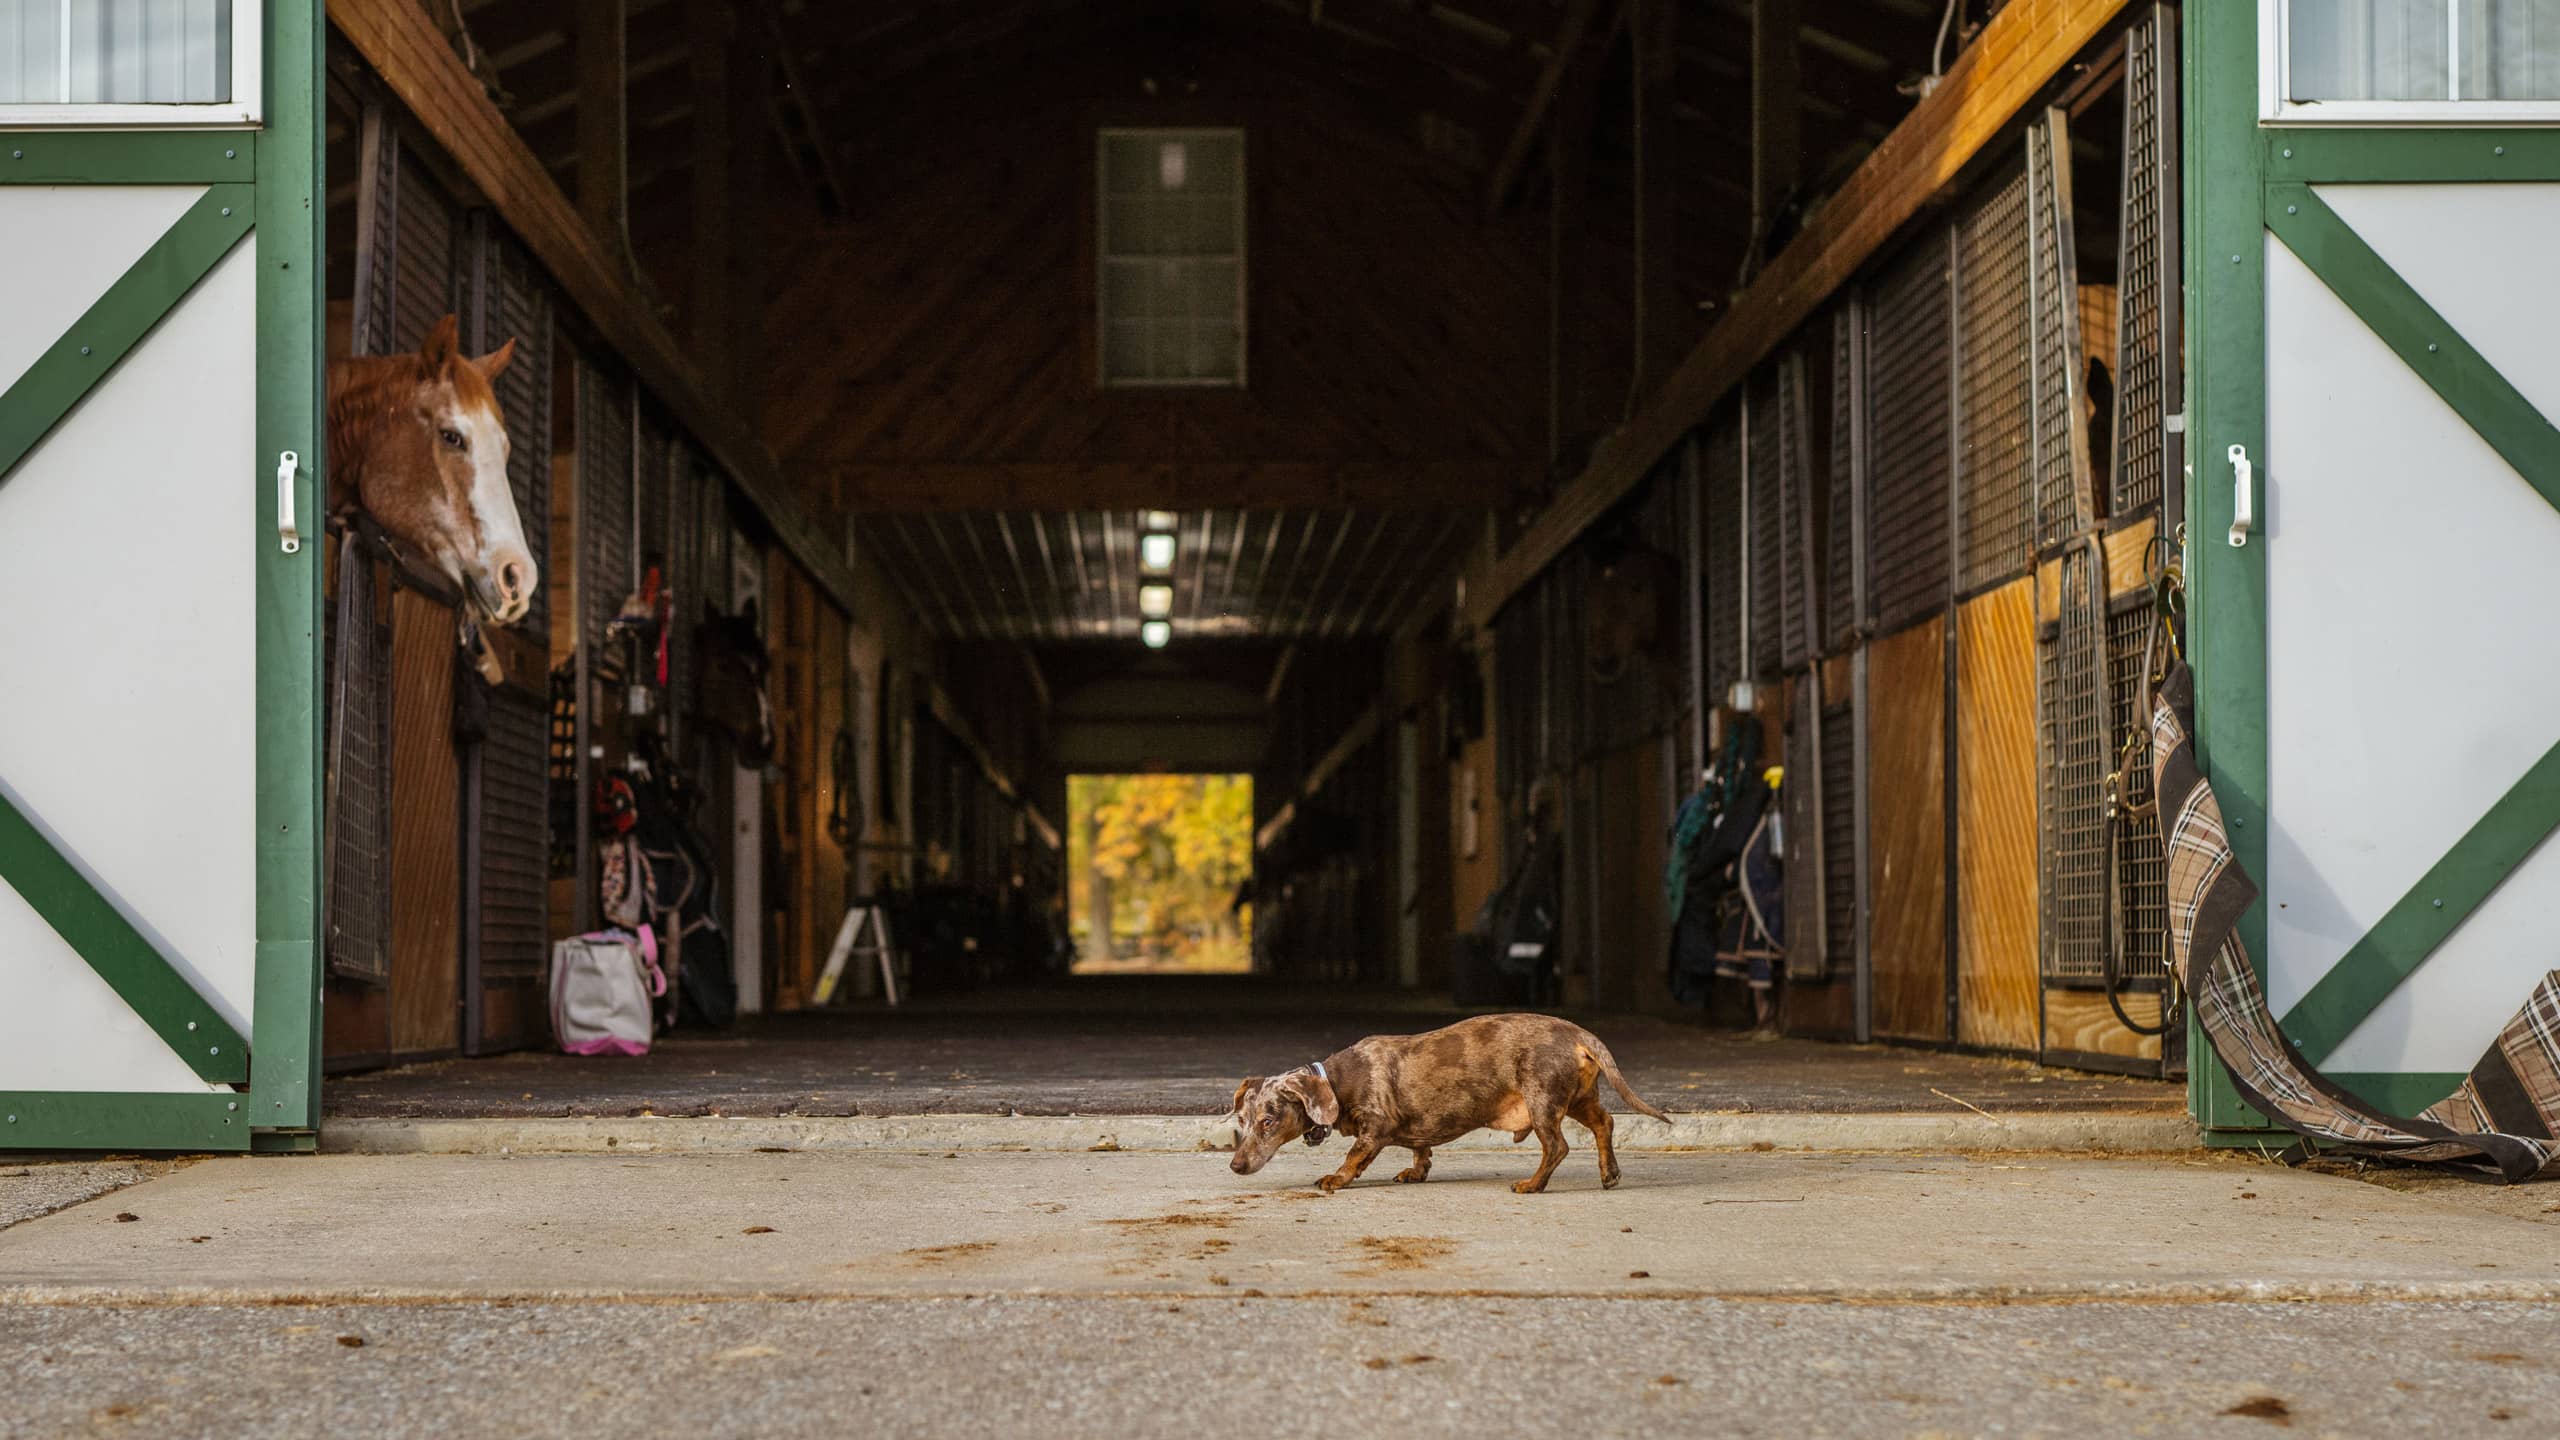 A breezeway barn at Still Water Farm with horses in stalls on a sunny autumn day with a small dog exploring in foreground